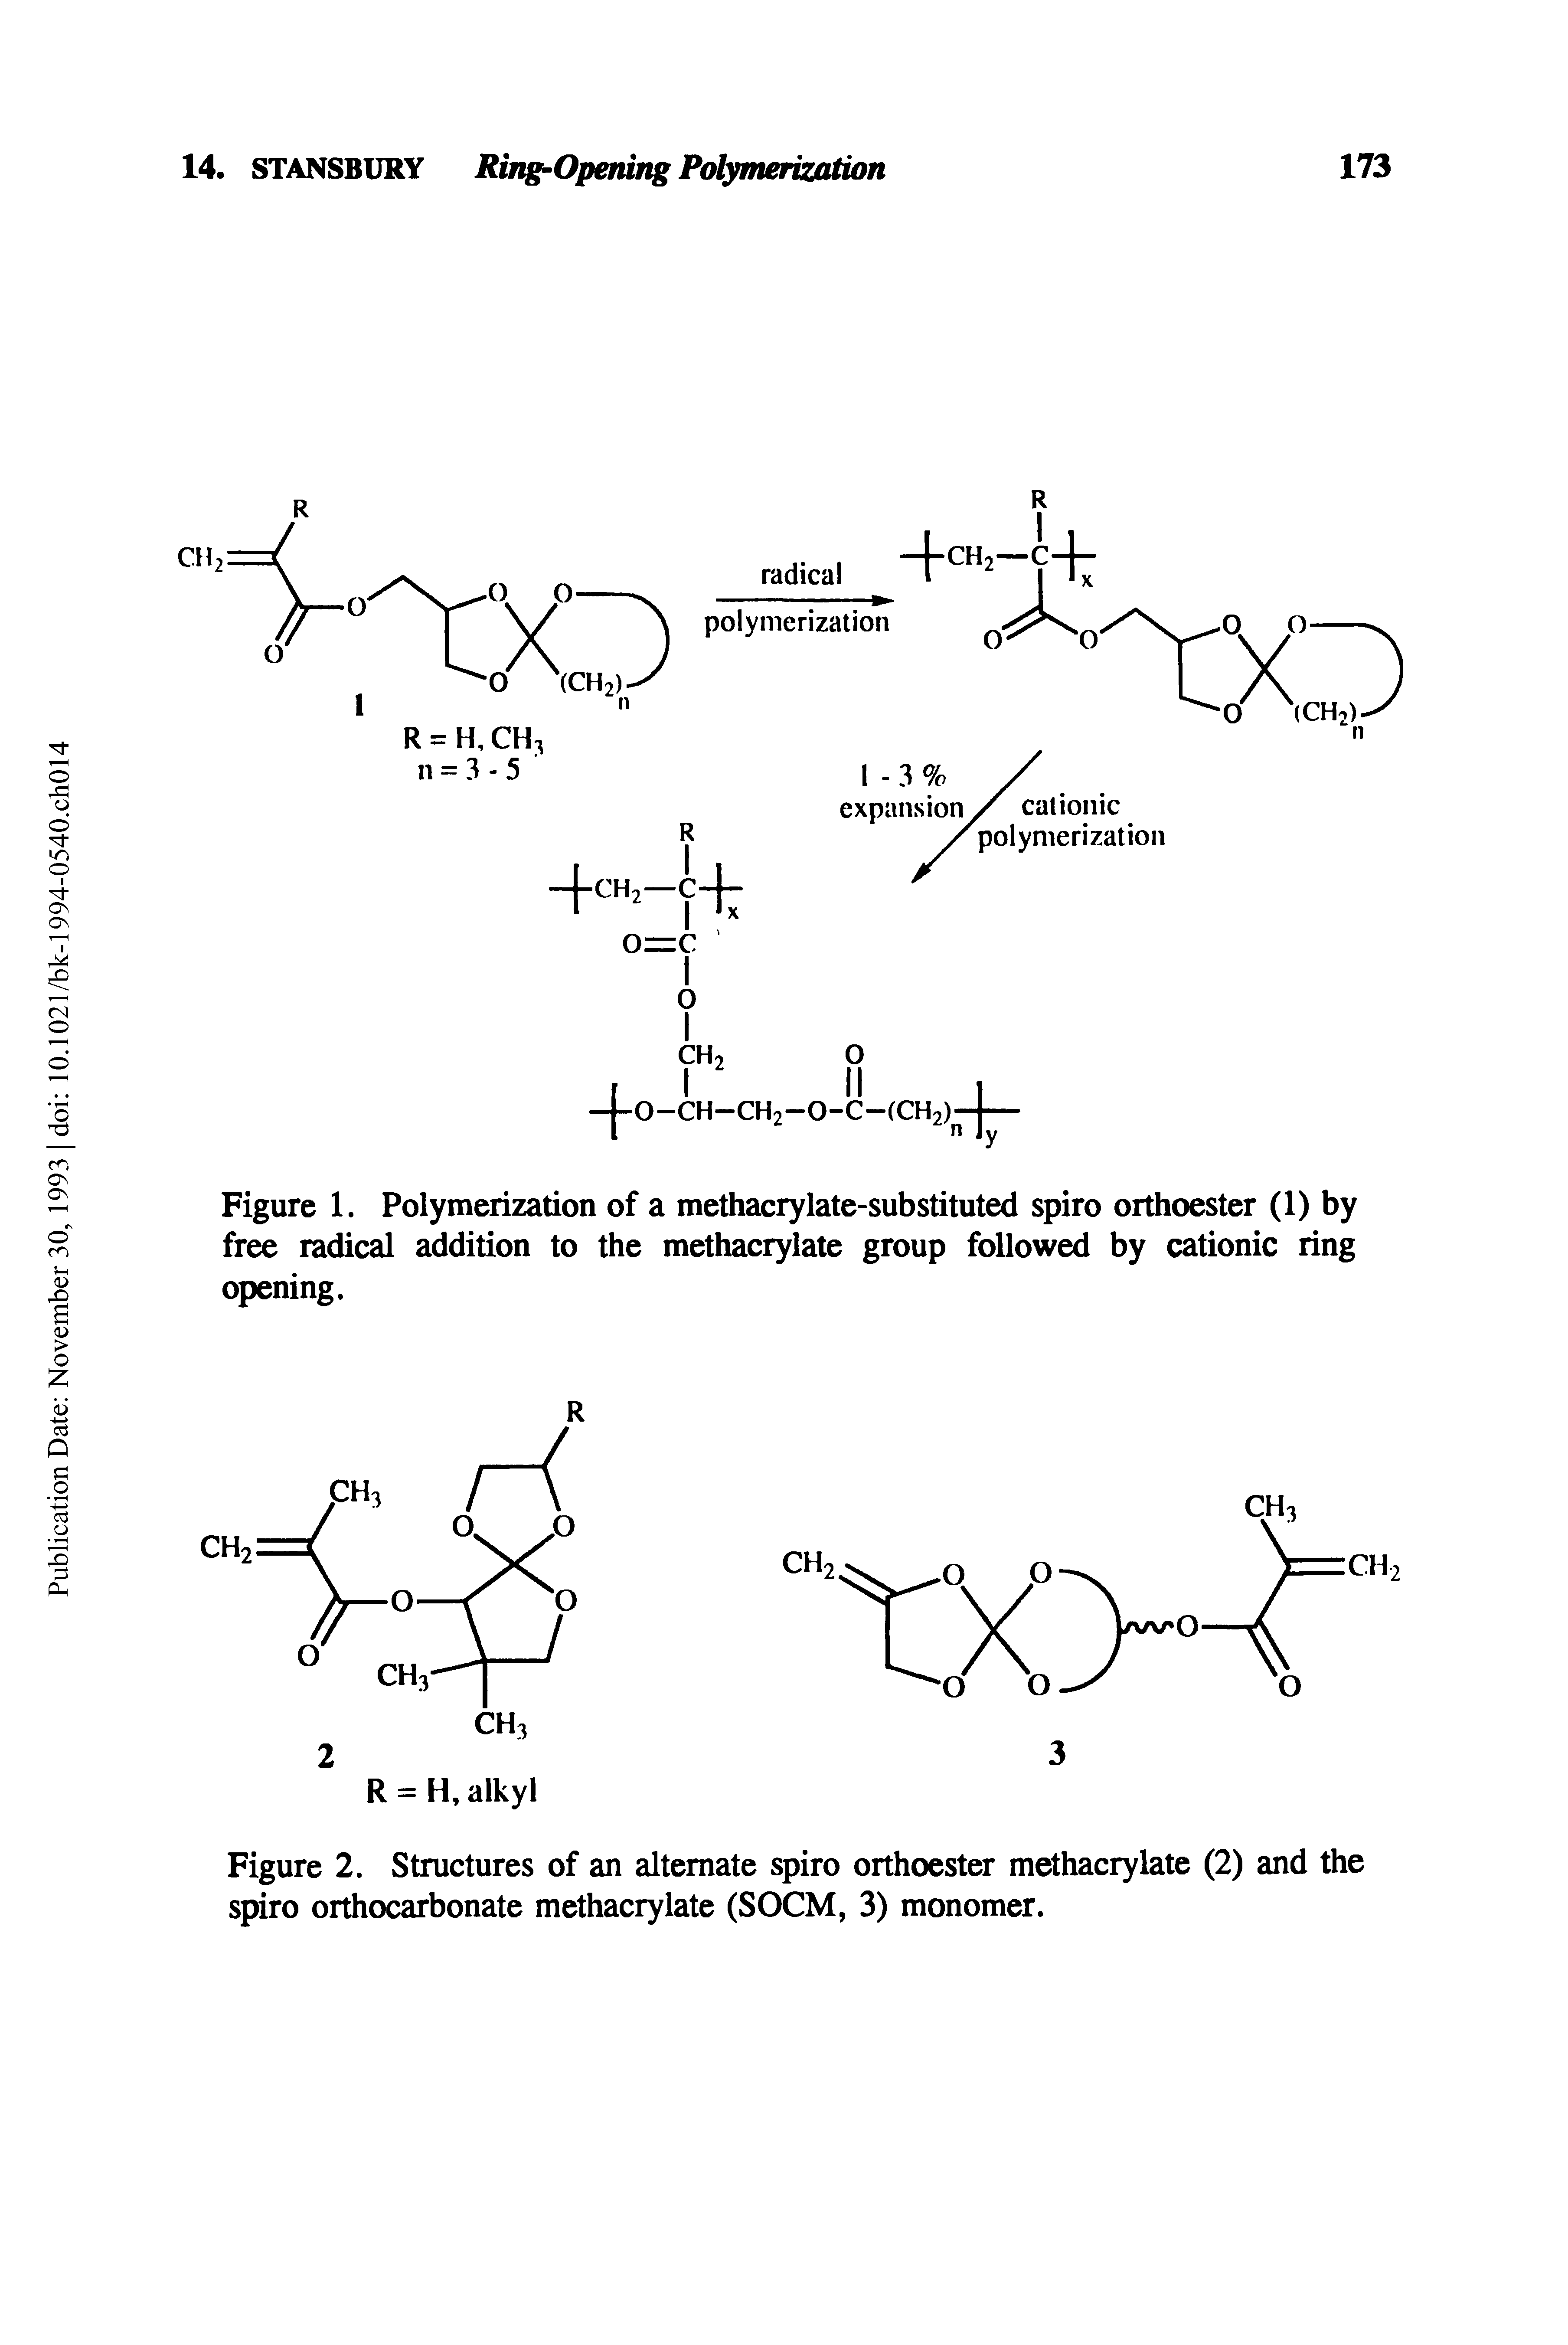 Figure 2. Structures of an alternate spiro orthoester methacrylate (2) and the Spiro orthocarbonate methacrylate (SOCM, 3) monomer.